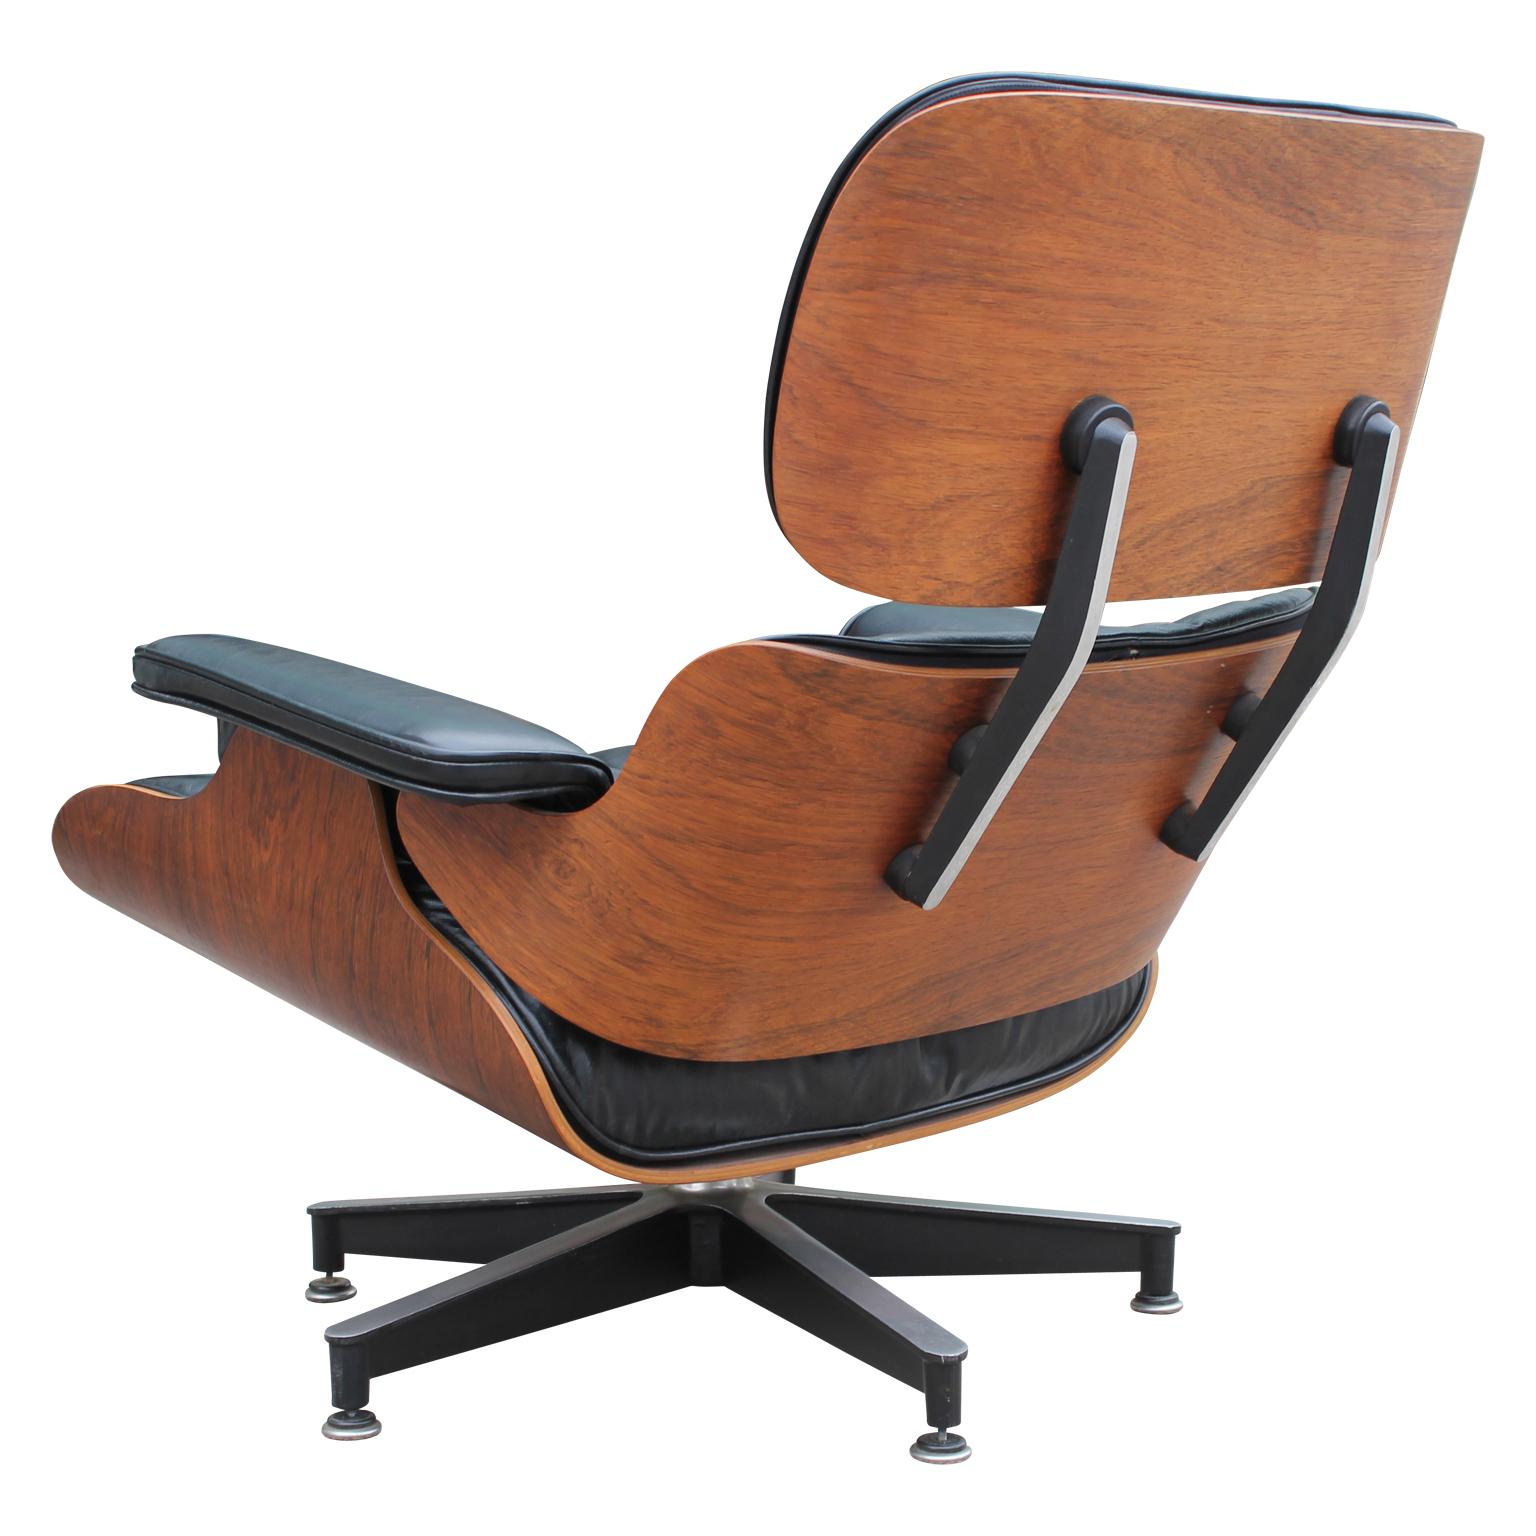 Mid-20th Century Modern Black Leather and Rosewood Herman Miller Eames Lounge Chair and Ottoman